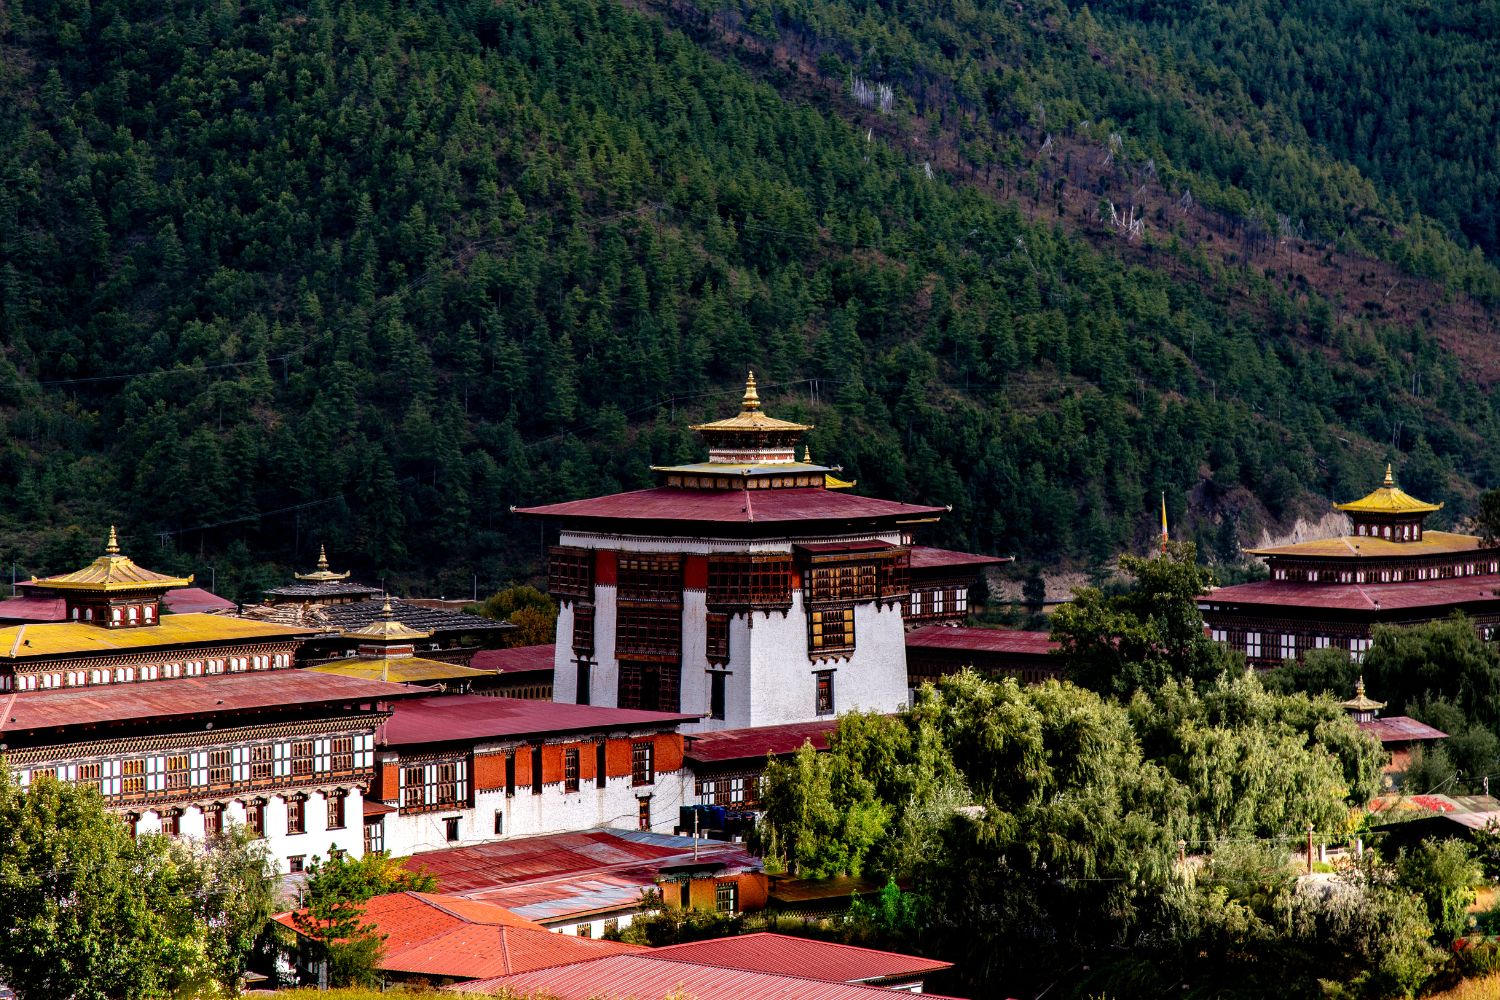 Bhutan Culture and Customs » All you need to know Bhutan